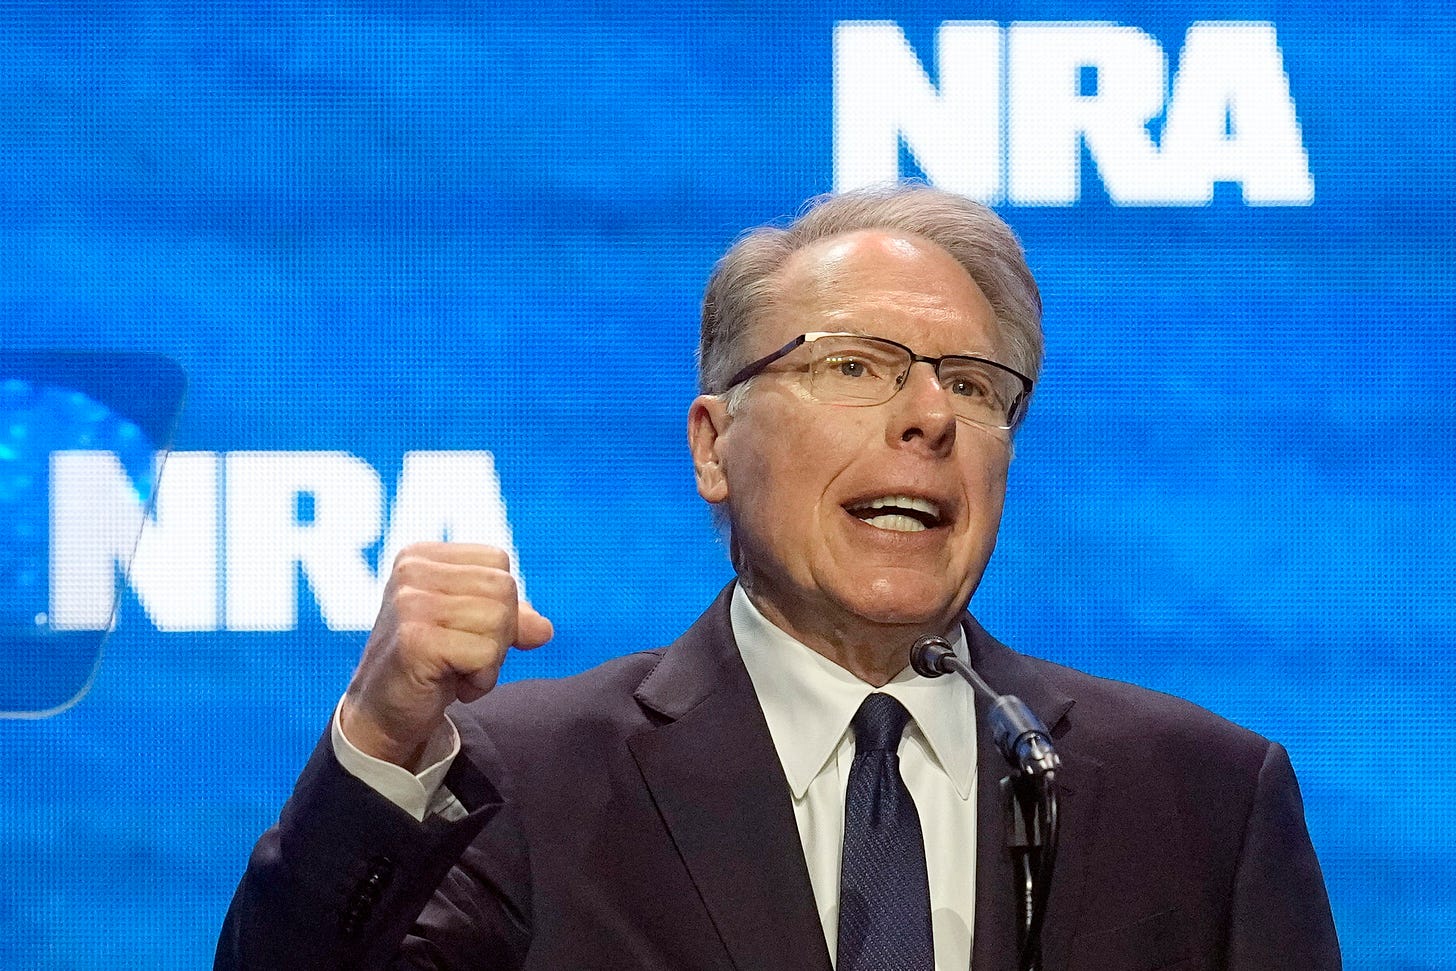 FILE - Wayne LaPierre, CEO and executive vice-president of the National Rifle Association, addresses the National Rifle Association Convention, April 14, 2023, in Indianapolis. The National Rifle Association of America (NRA) announced Friday, Jan 5, 2025, that LaPierre said he is stepping down from his position as chief executive of the organization, effective Jan. 31. (AP Photo/Darron Cummings, File)